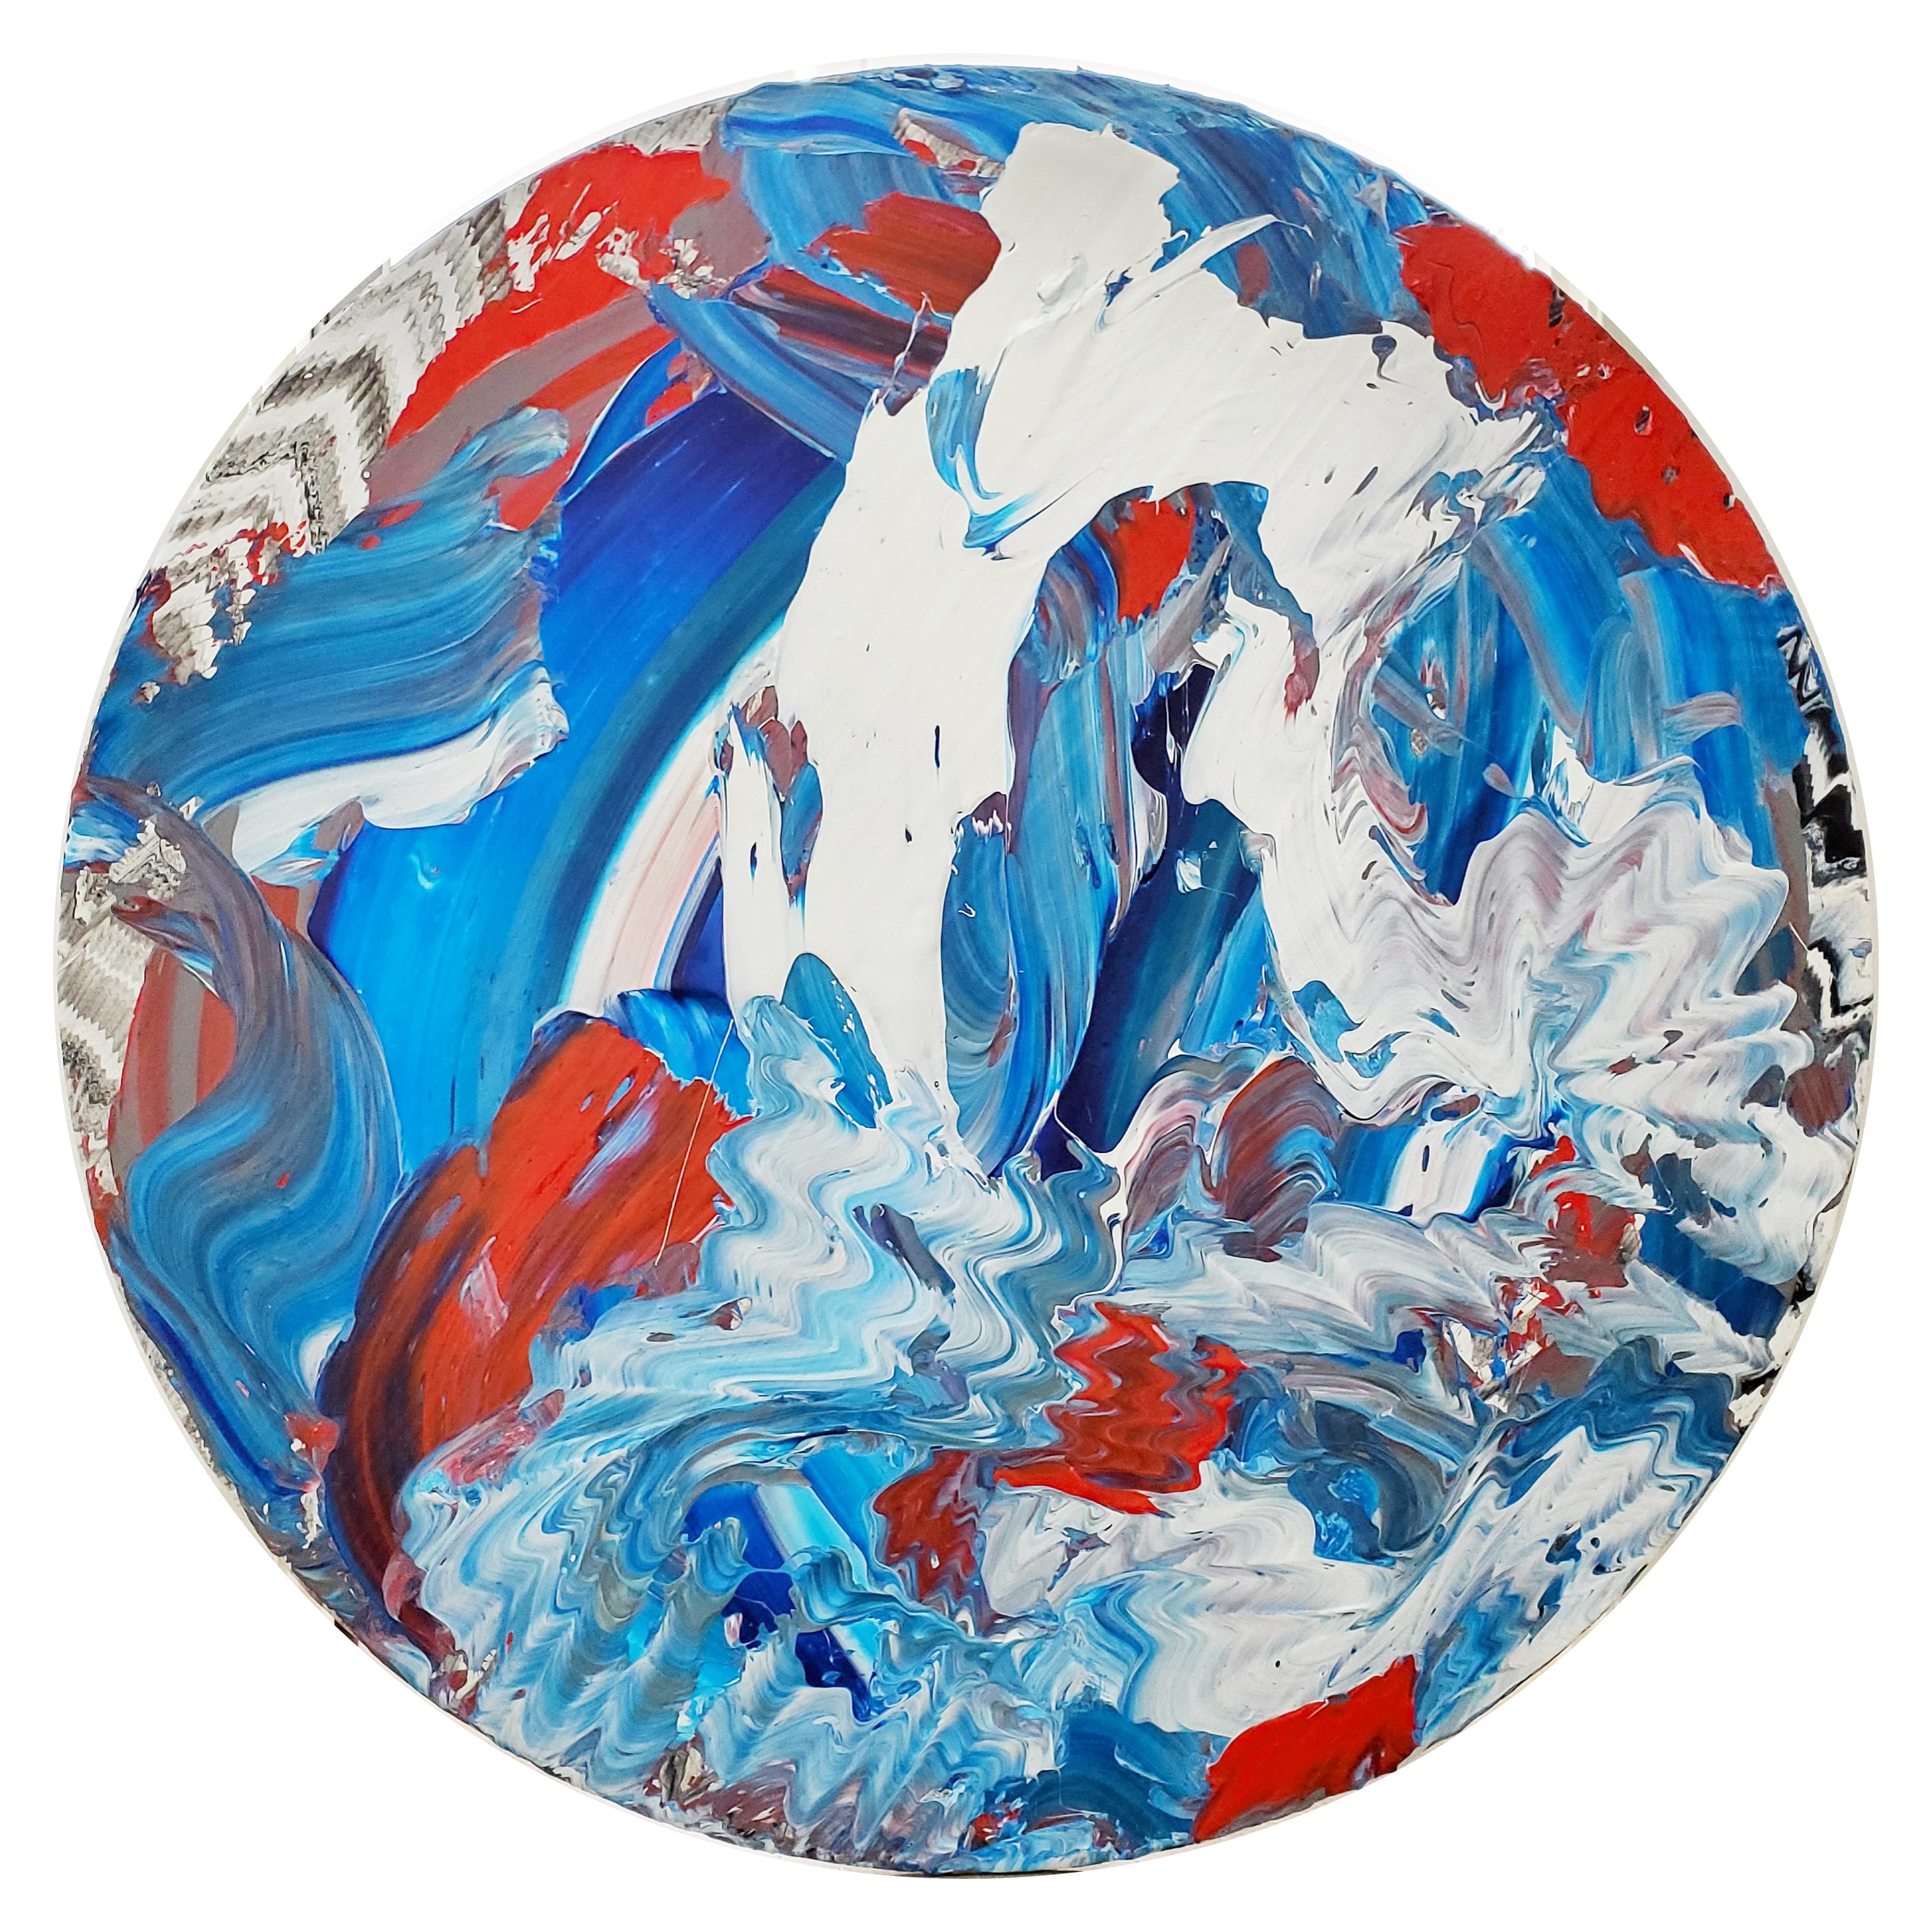 Robert Standish's circular work "The Energy Within" is a prime example of the artist's exceptional talent for imbuing a work of art with a palpable sense of presence. Employing a restrained palette of blues, oranges, black, and white, Standish